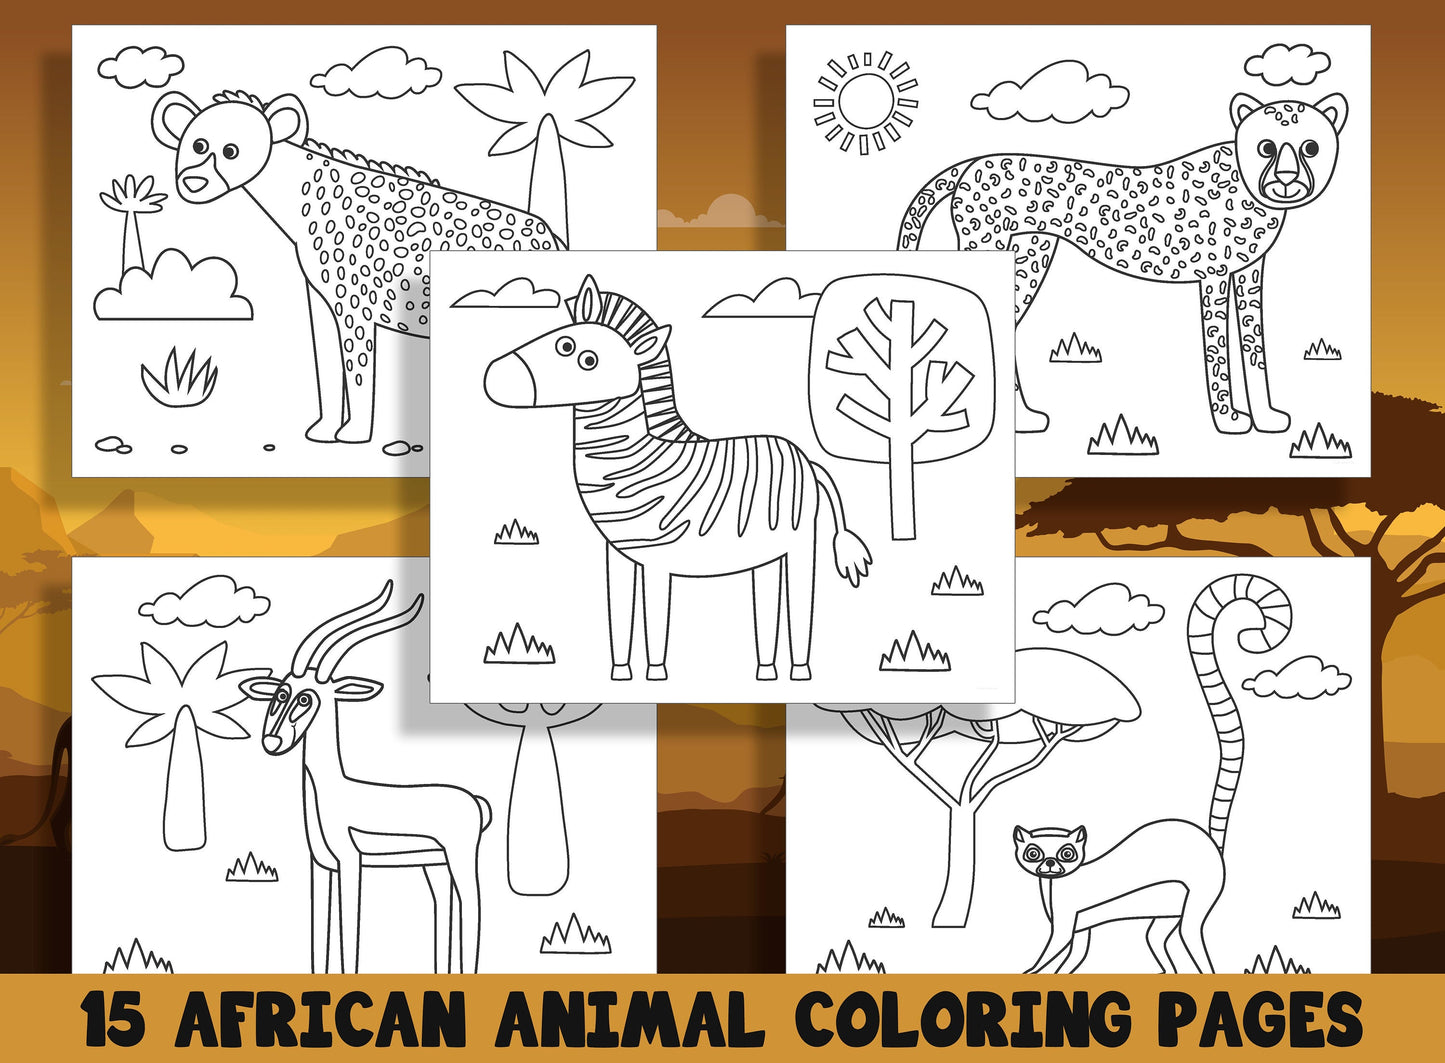 15 Fun and Educational African Animal Coloring Pages for Preschool and Kindergarten Kids, PDF File, Instant Download